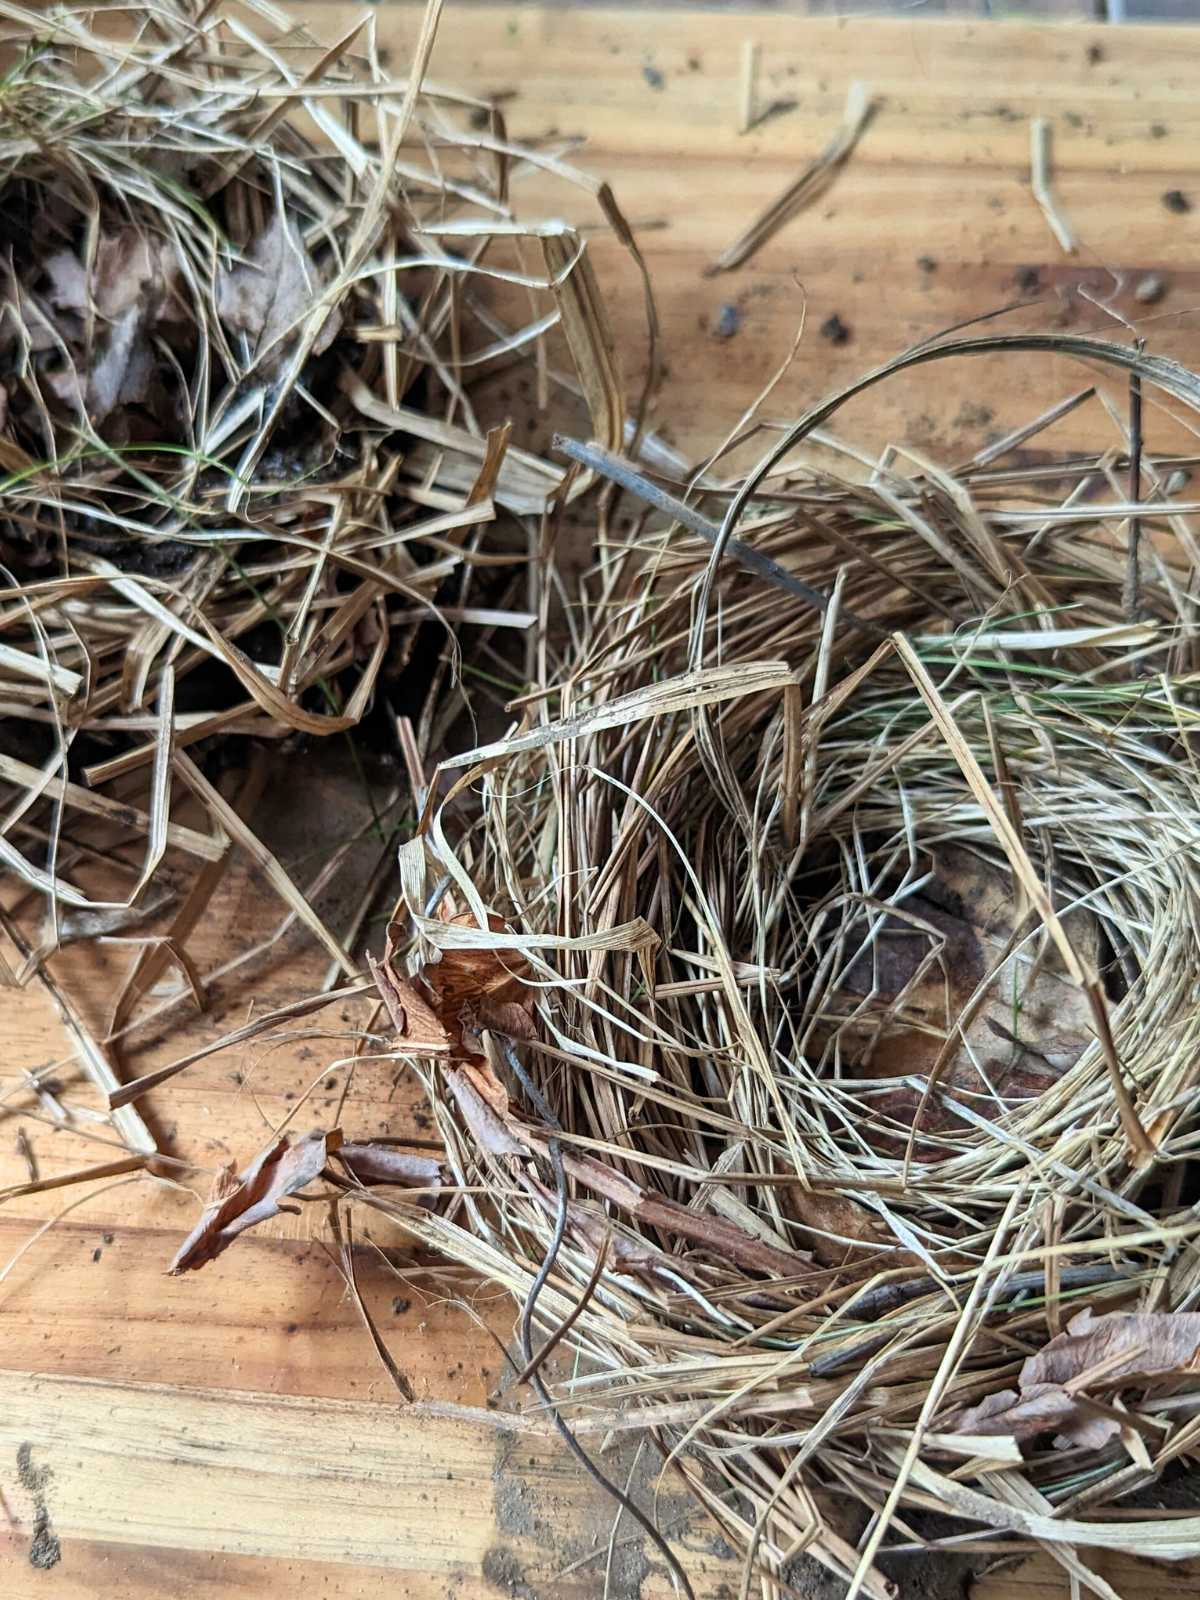 Two nests made out of gathered materials on a wooden cutting board.